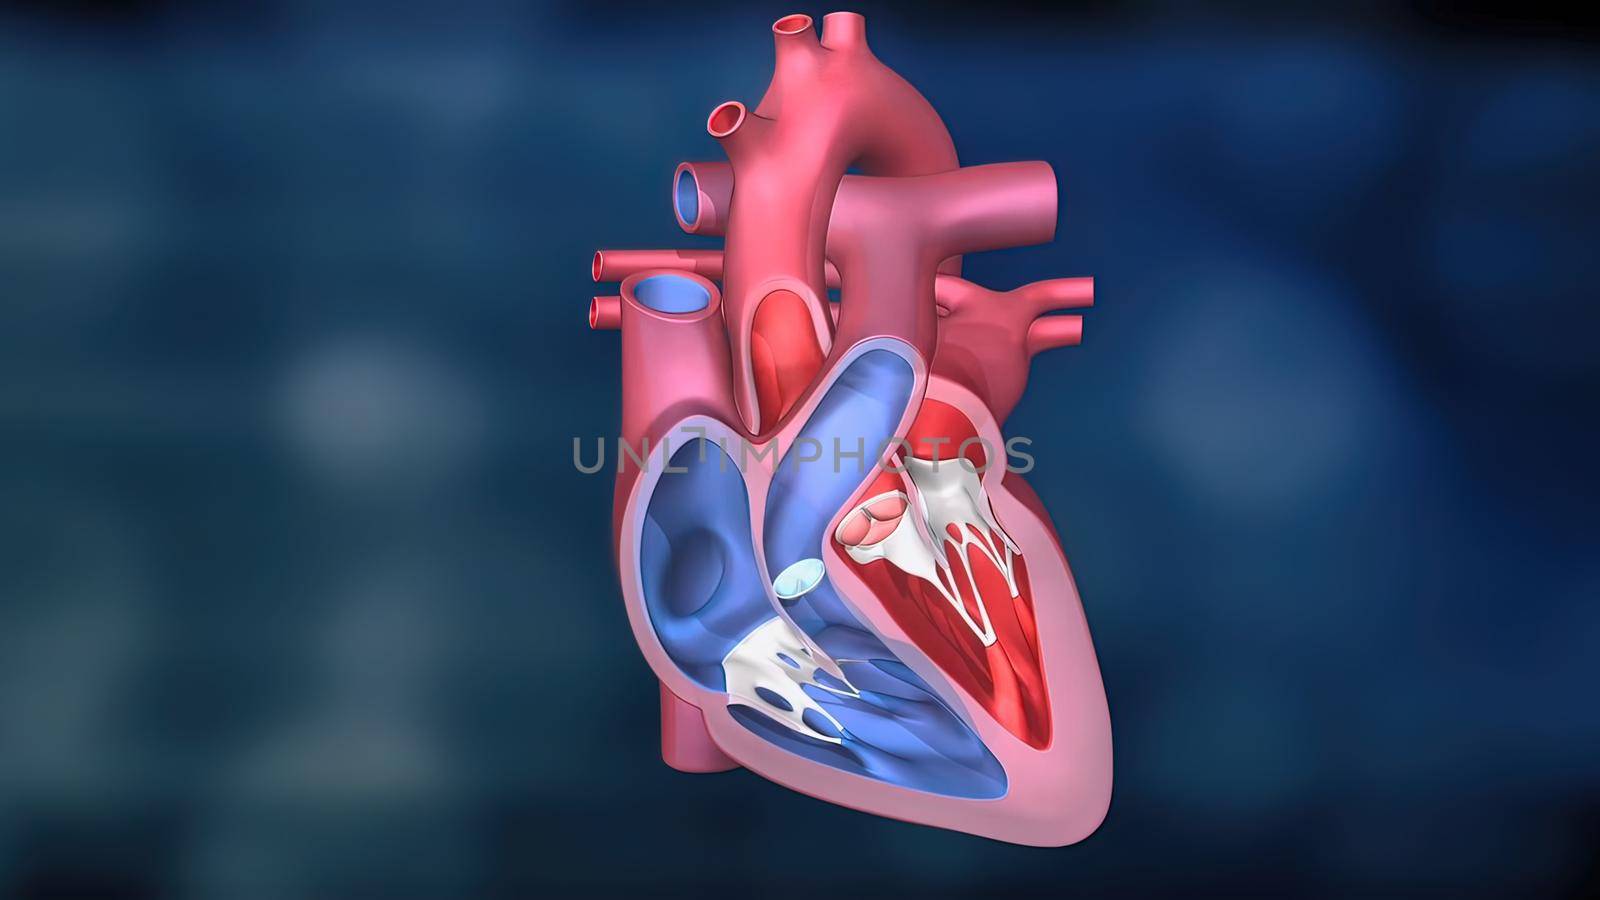 The Circulatory System is a network consisting of blood vessels, blood vessels, and the heart. 3D illustration